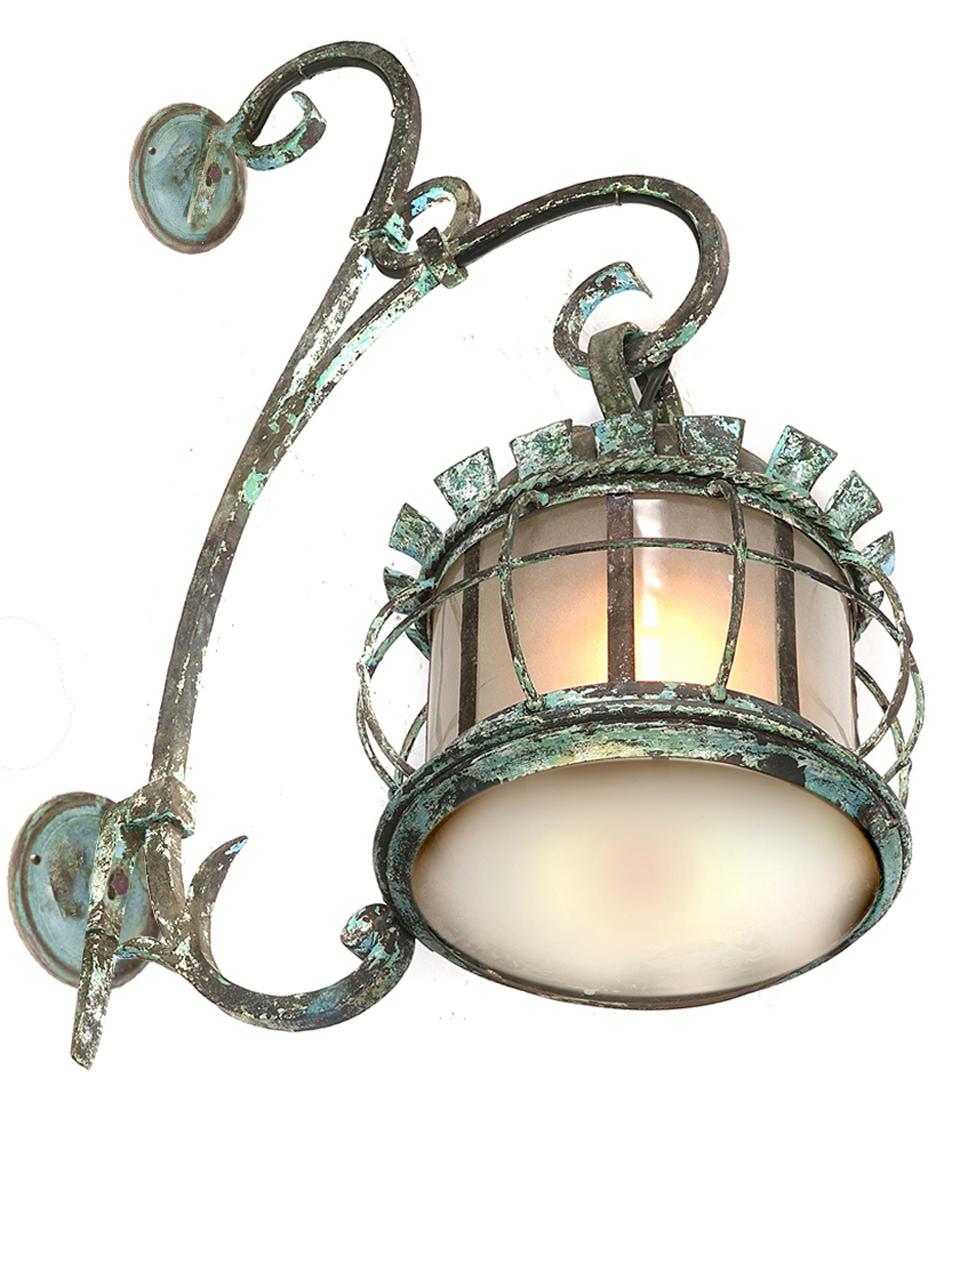 American Large Early Rustic Estate Sconce